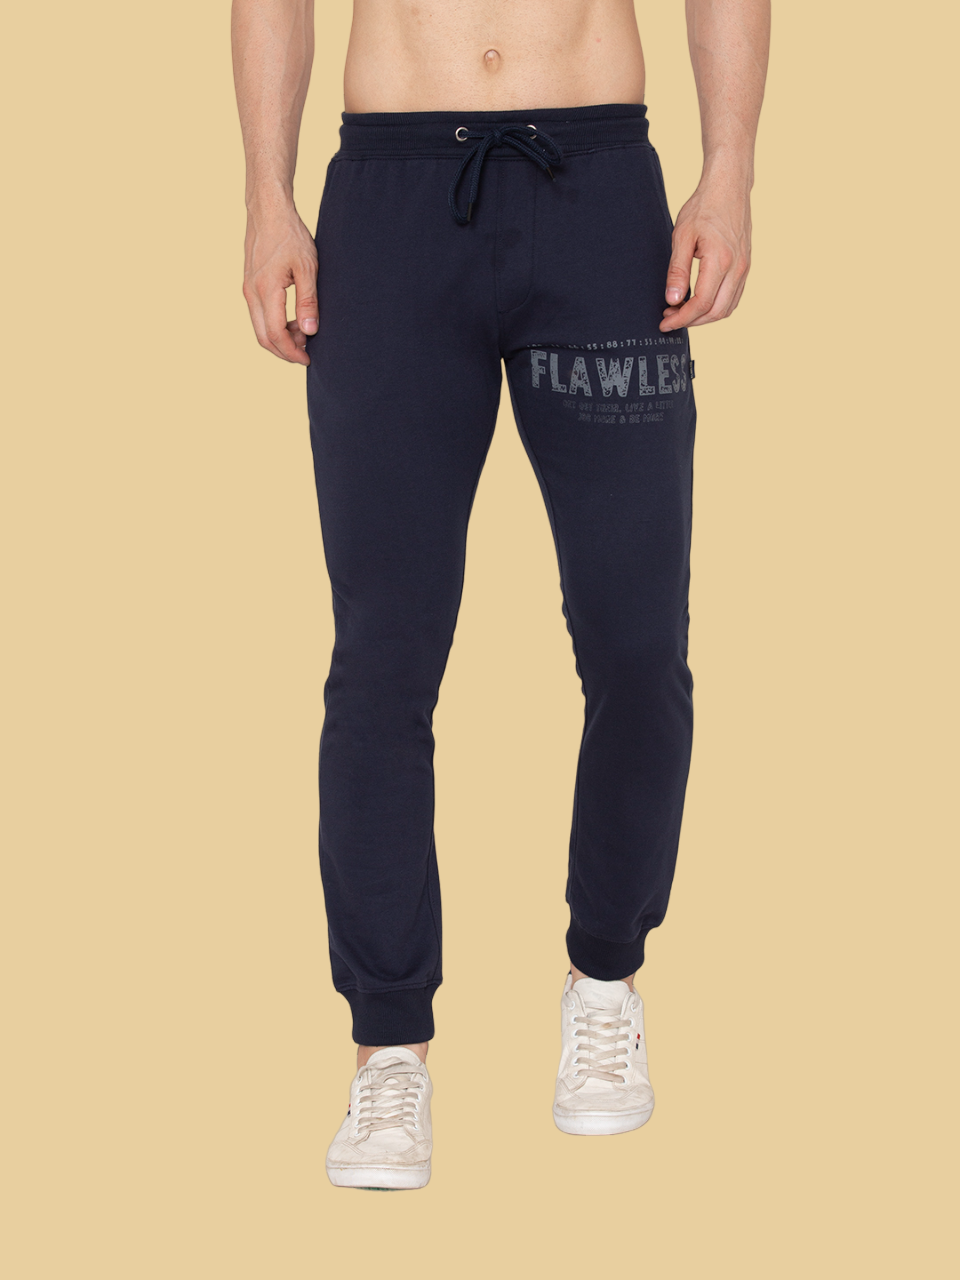 Flawless Men Navy Nerdy Joggers Being Flawless